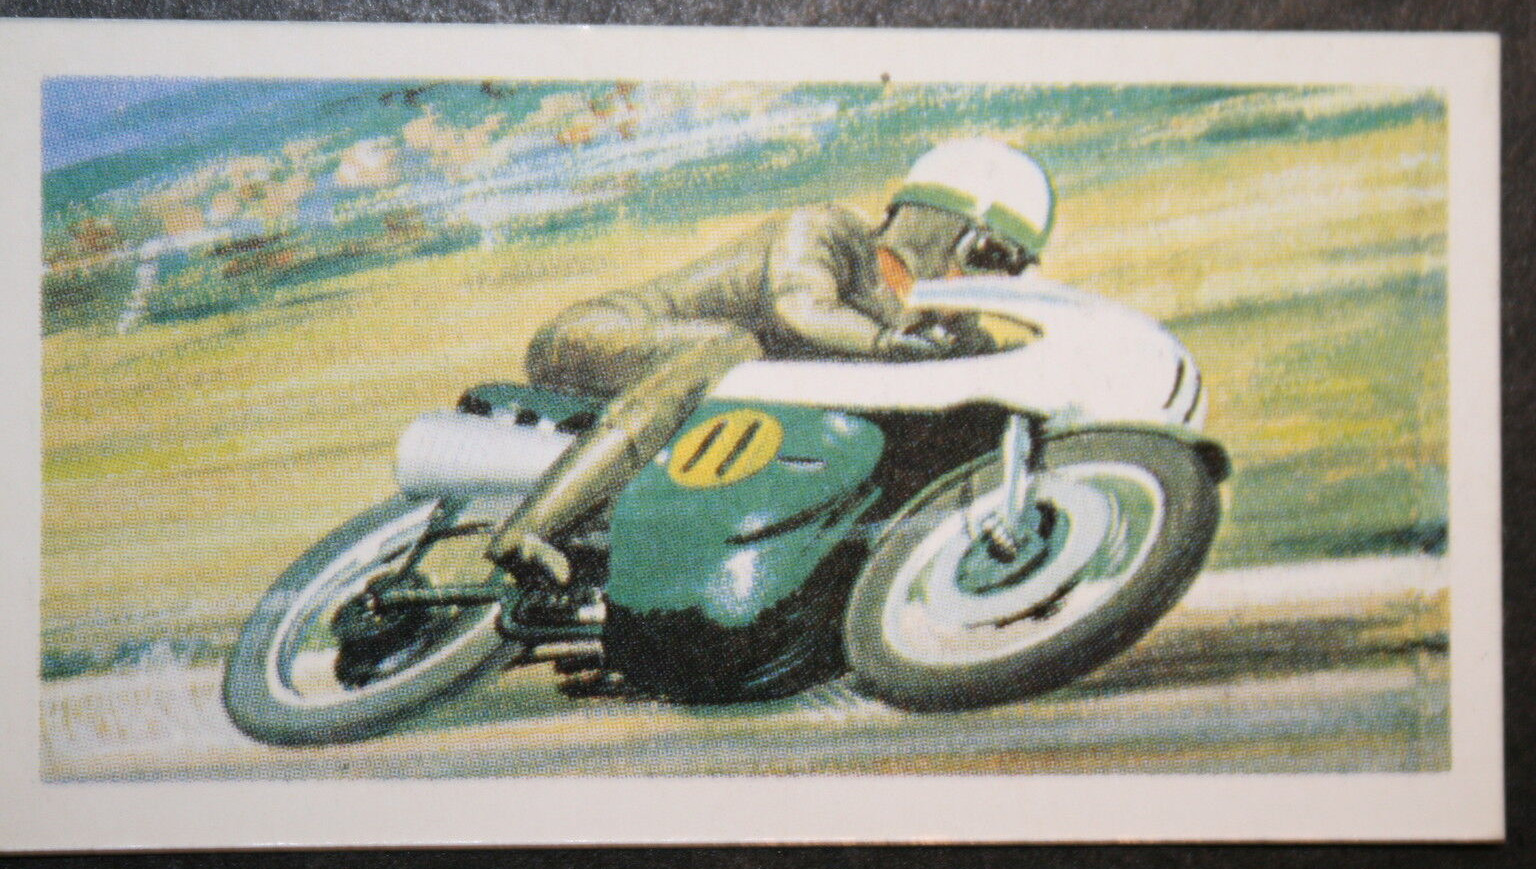 MATCHLESS 500cc Racing Motor Cycle   Vintage 1960's Colour Card   PC02M